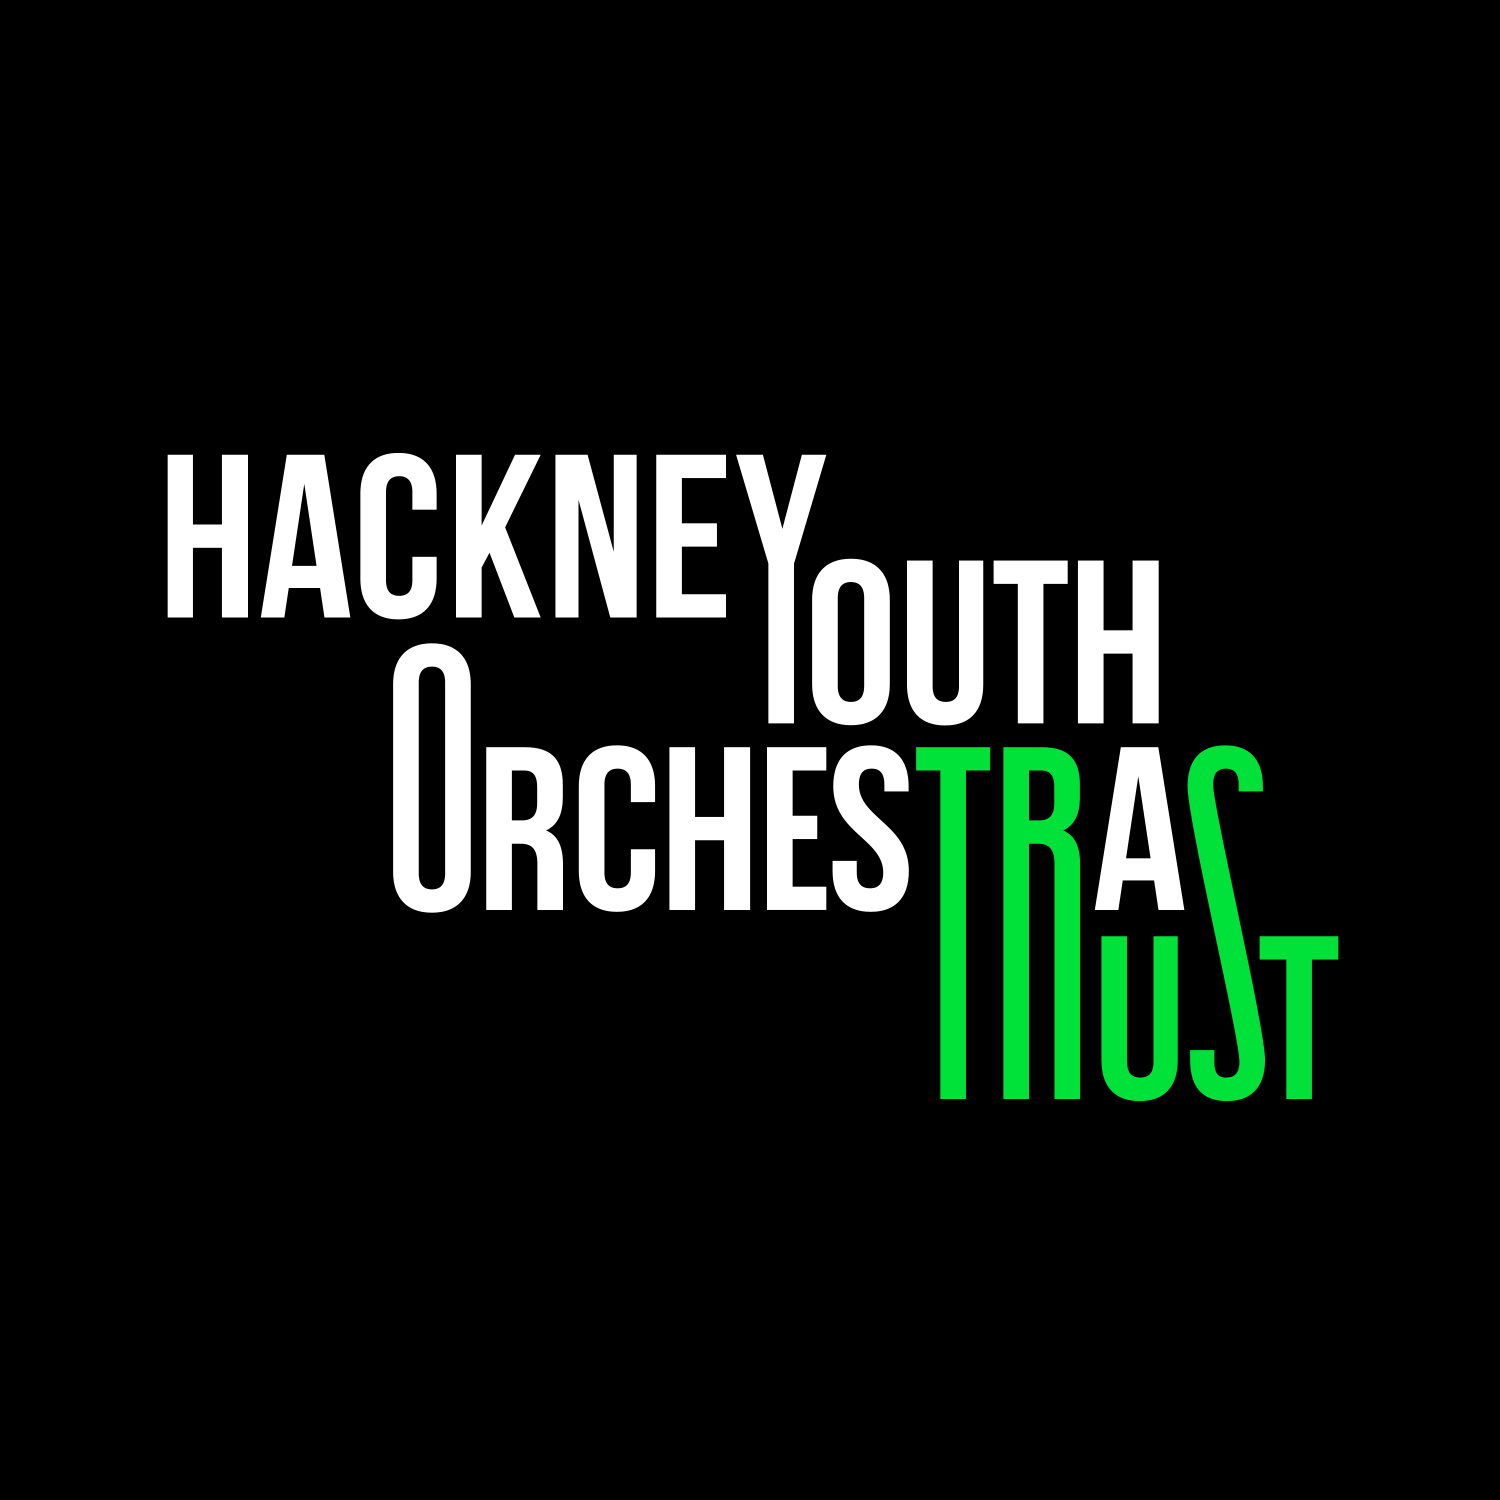 Brand Identity for Hackney Youth Orchestras Trust